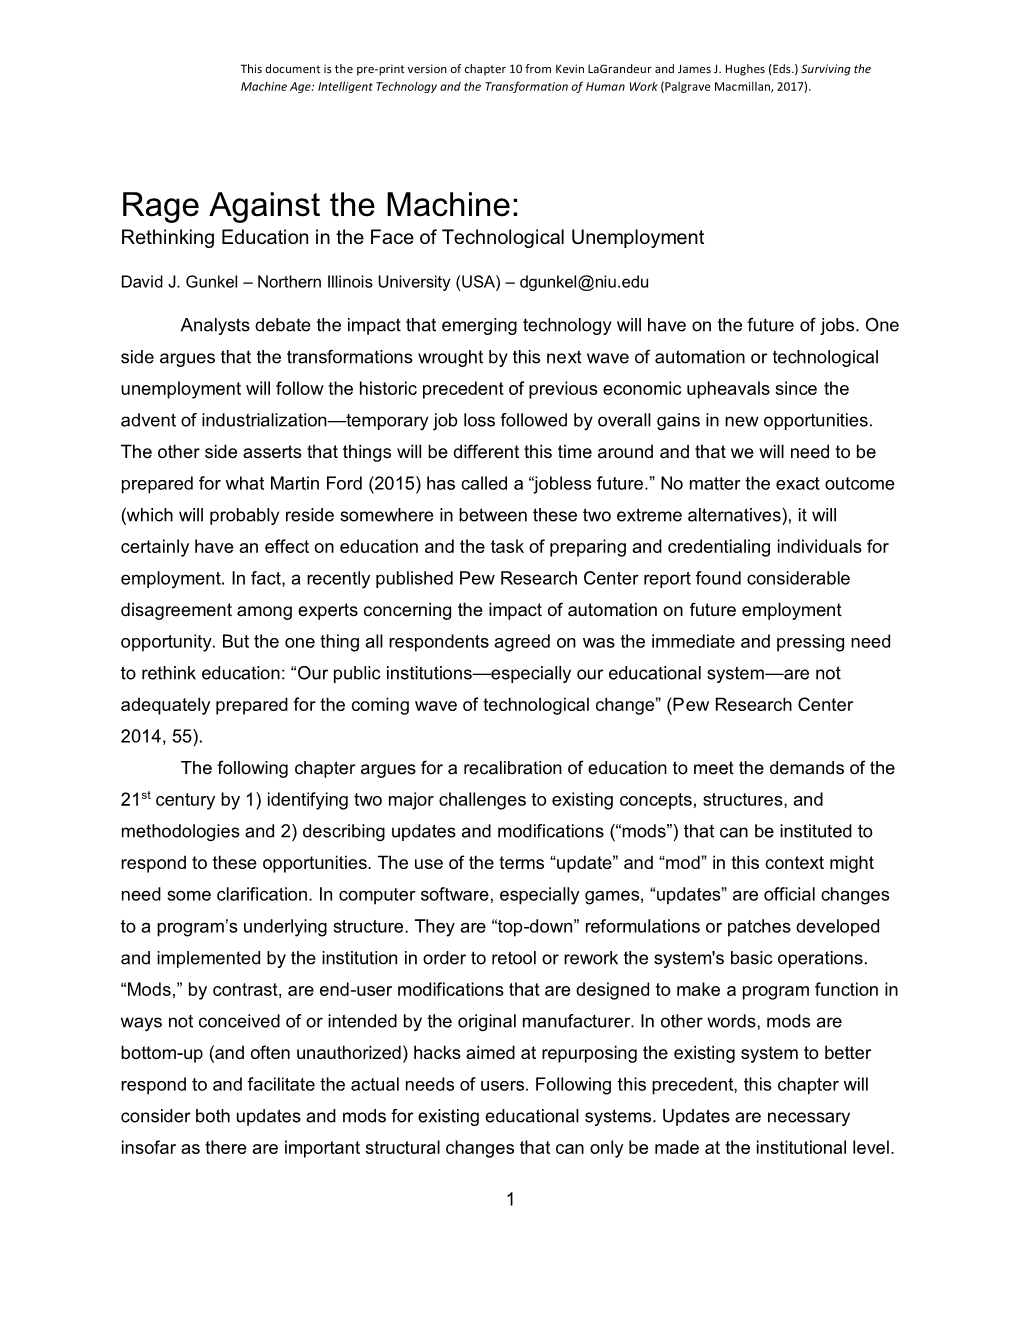 Rage Against the Machine: Rethinking Education in the Face of Technological Unemployment